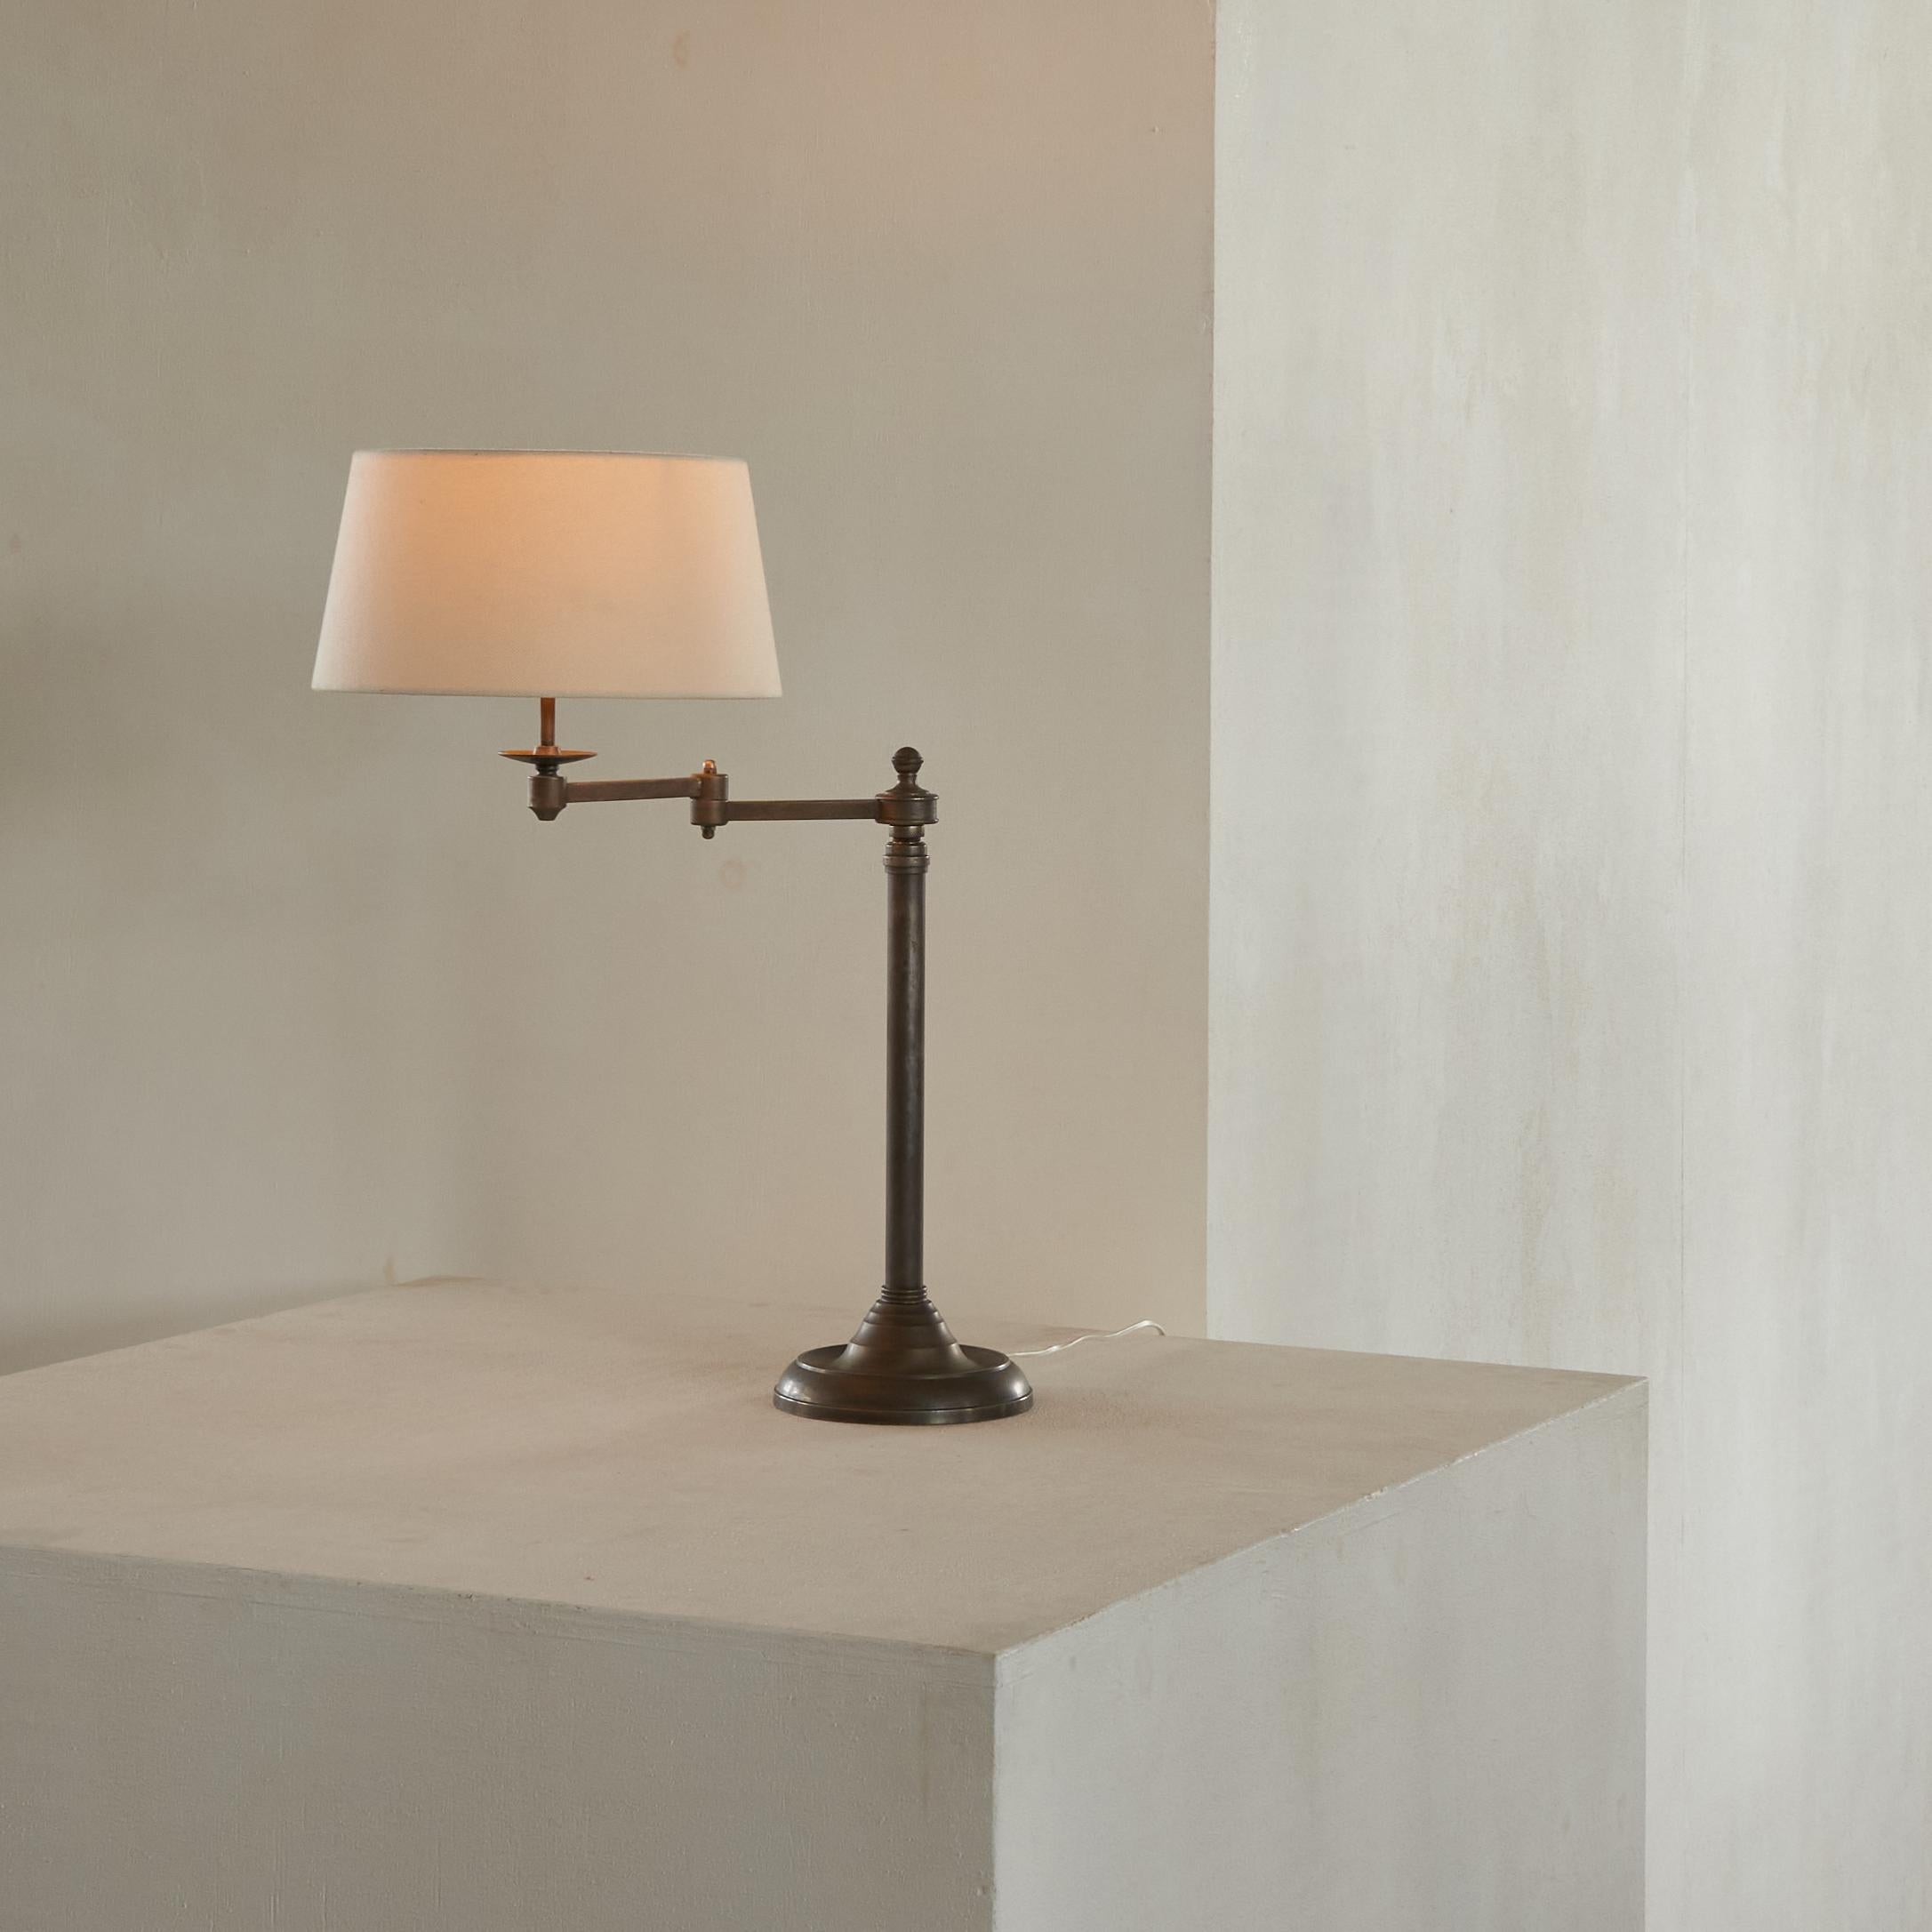 Hand-Crafted Italian Articulating Swivel Table Lamp in Metal 1970s For Sale